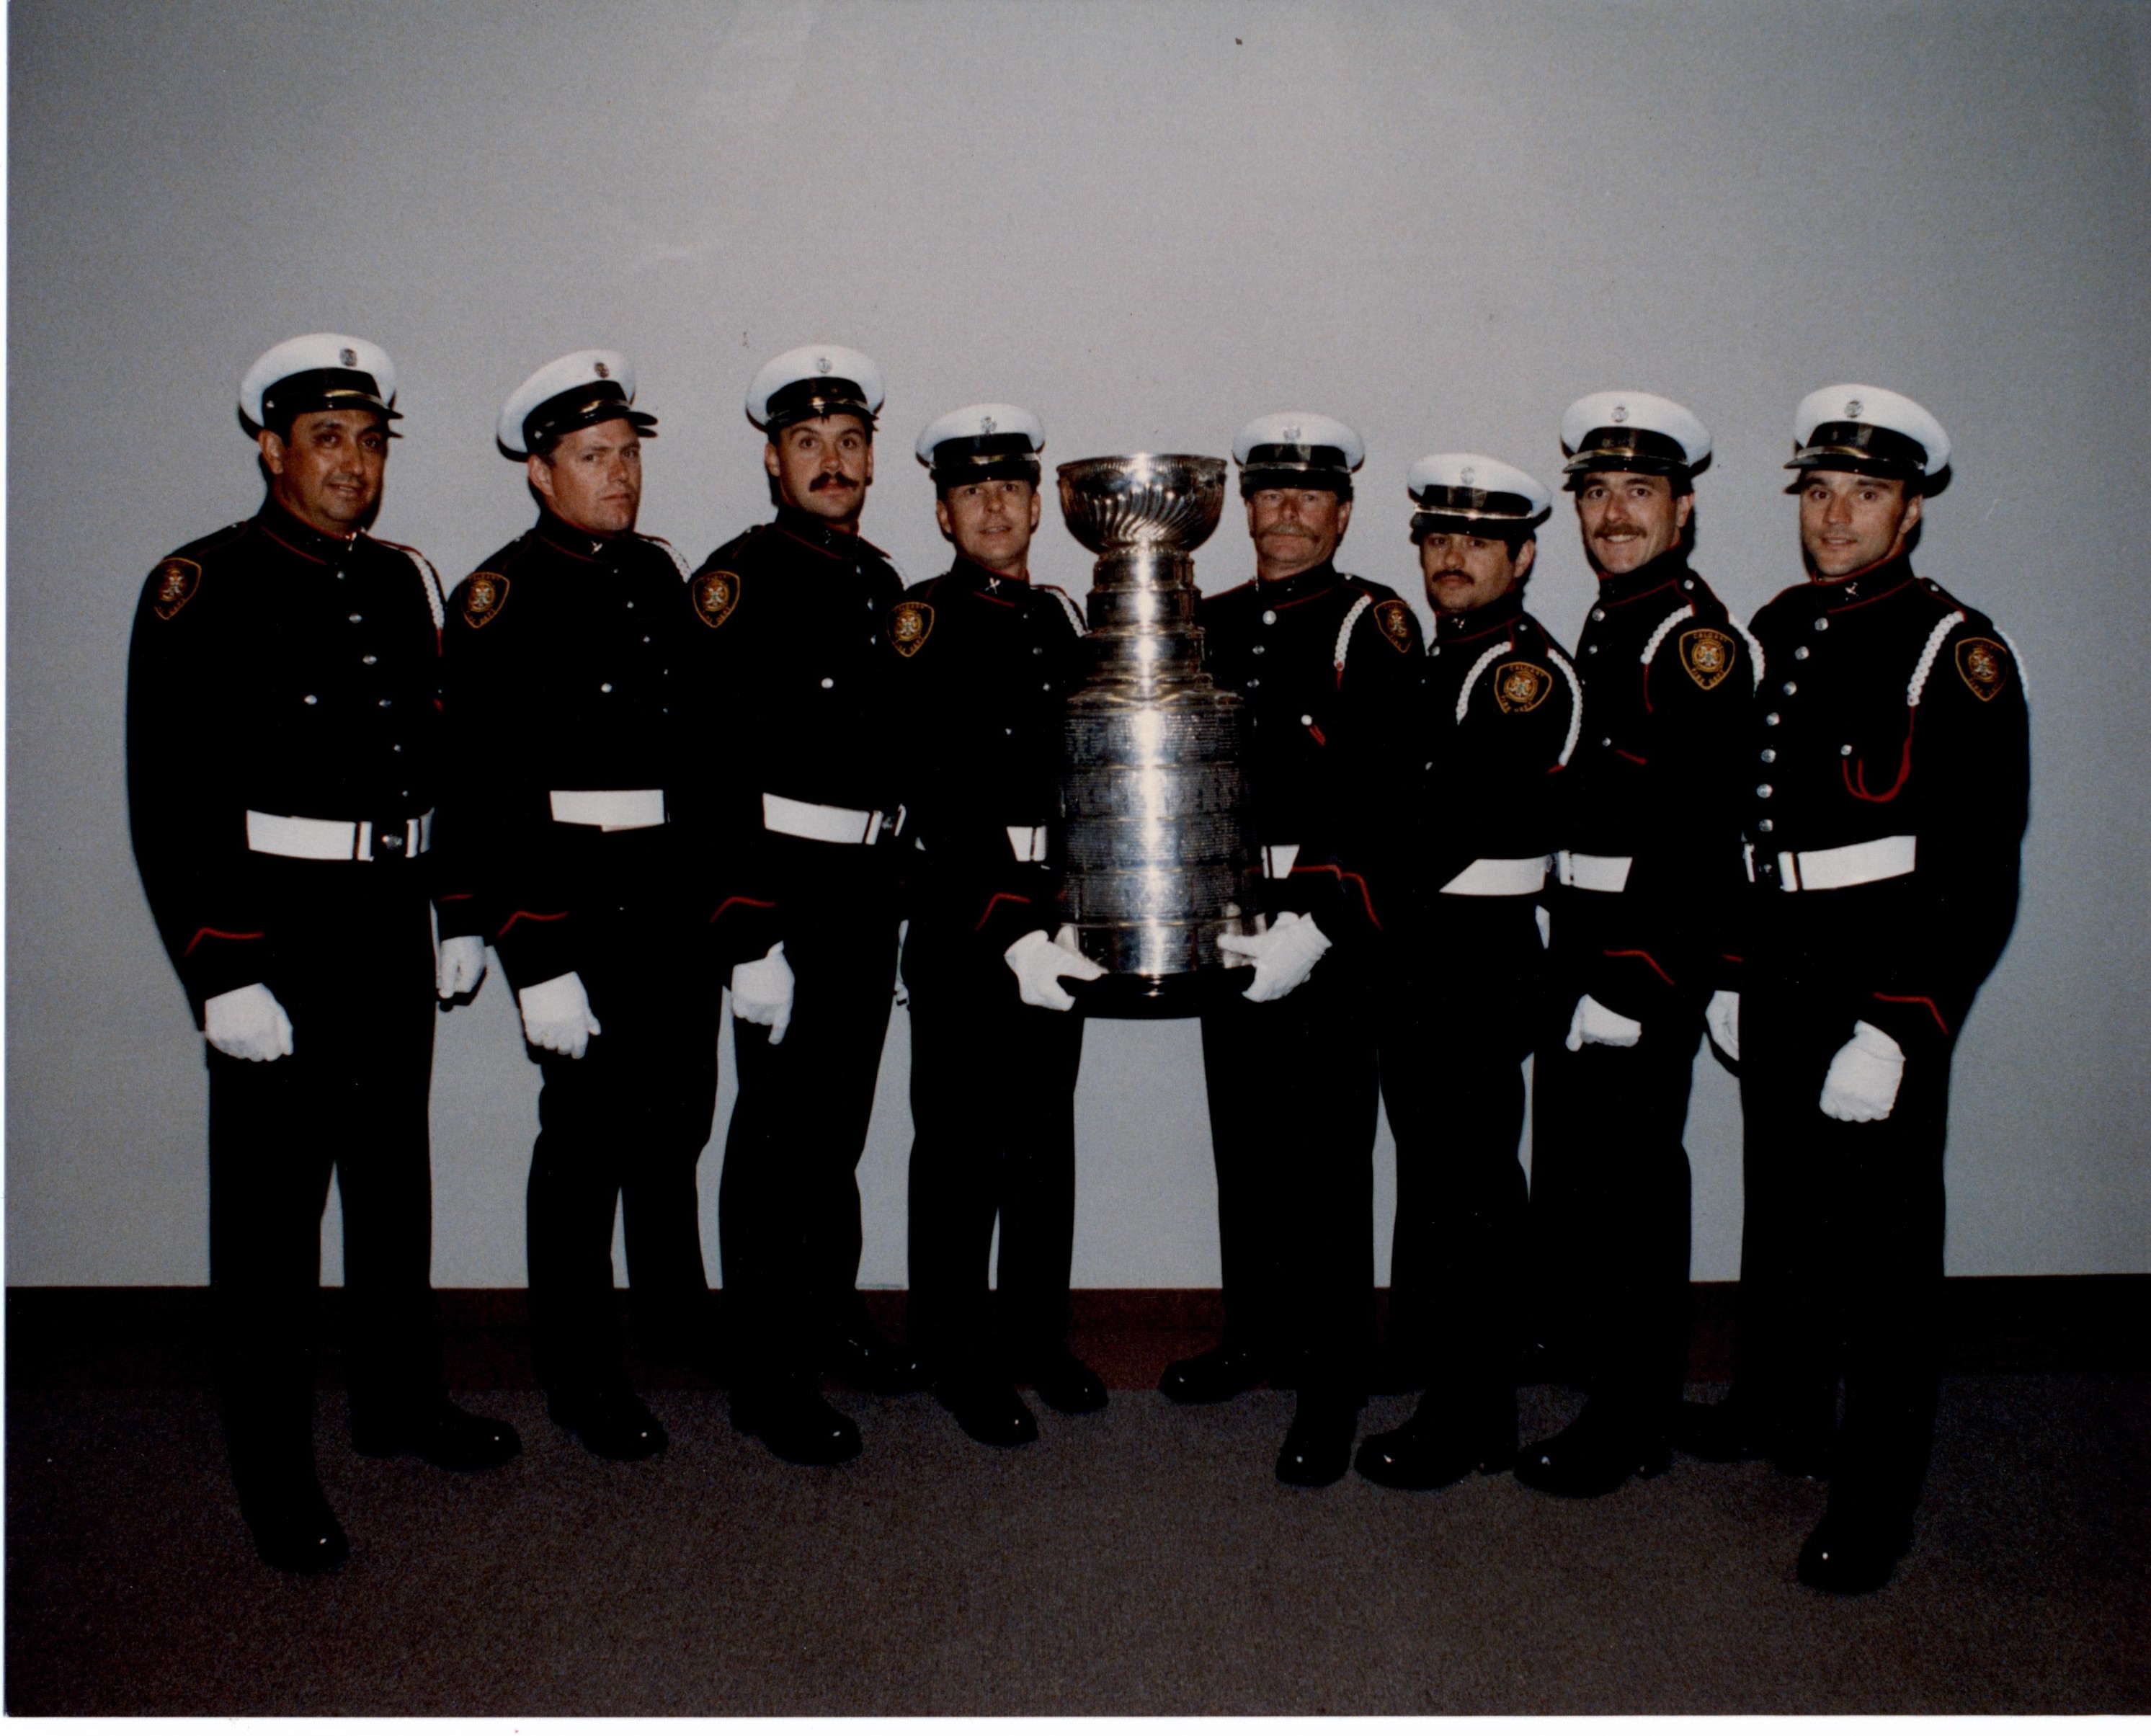 Eight firefighters in uniform stand either side of the Stanley Cup, being held up in centre.